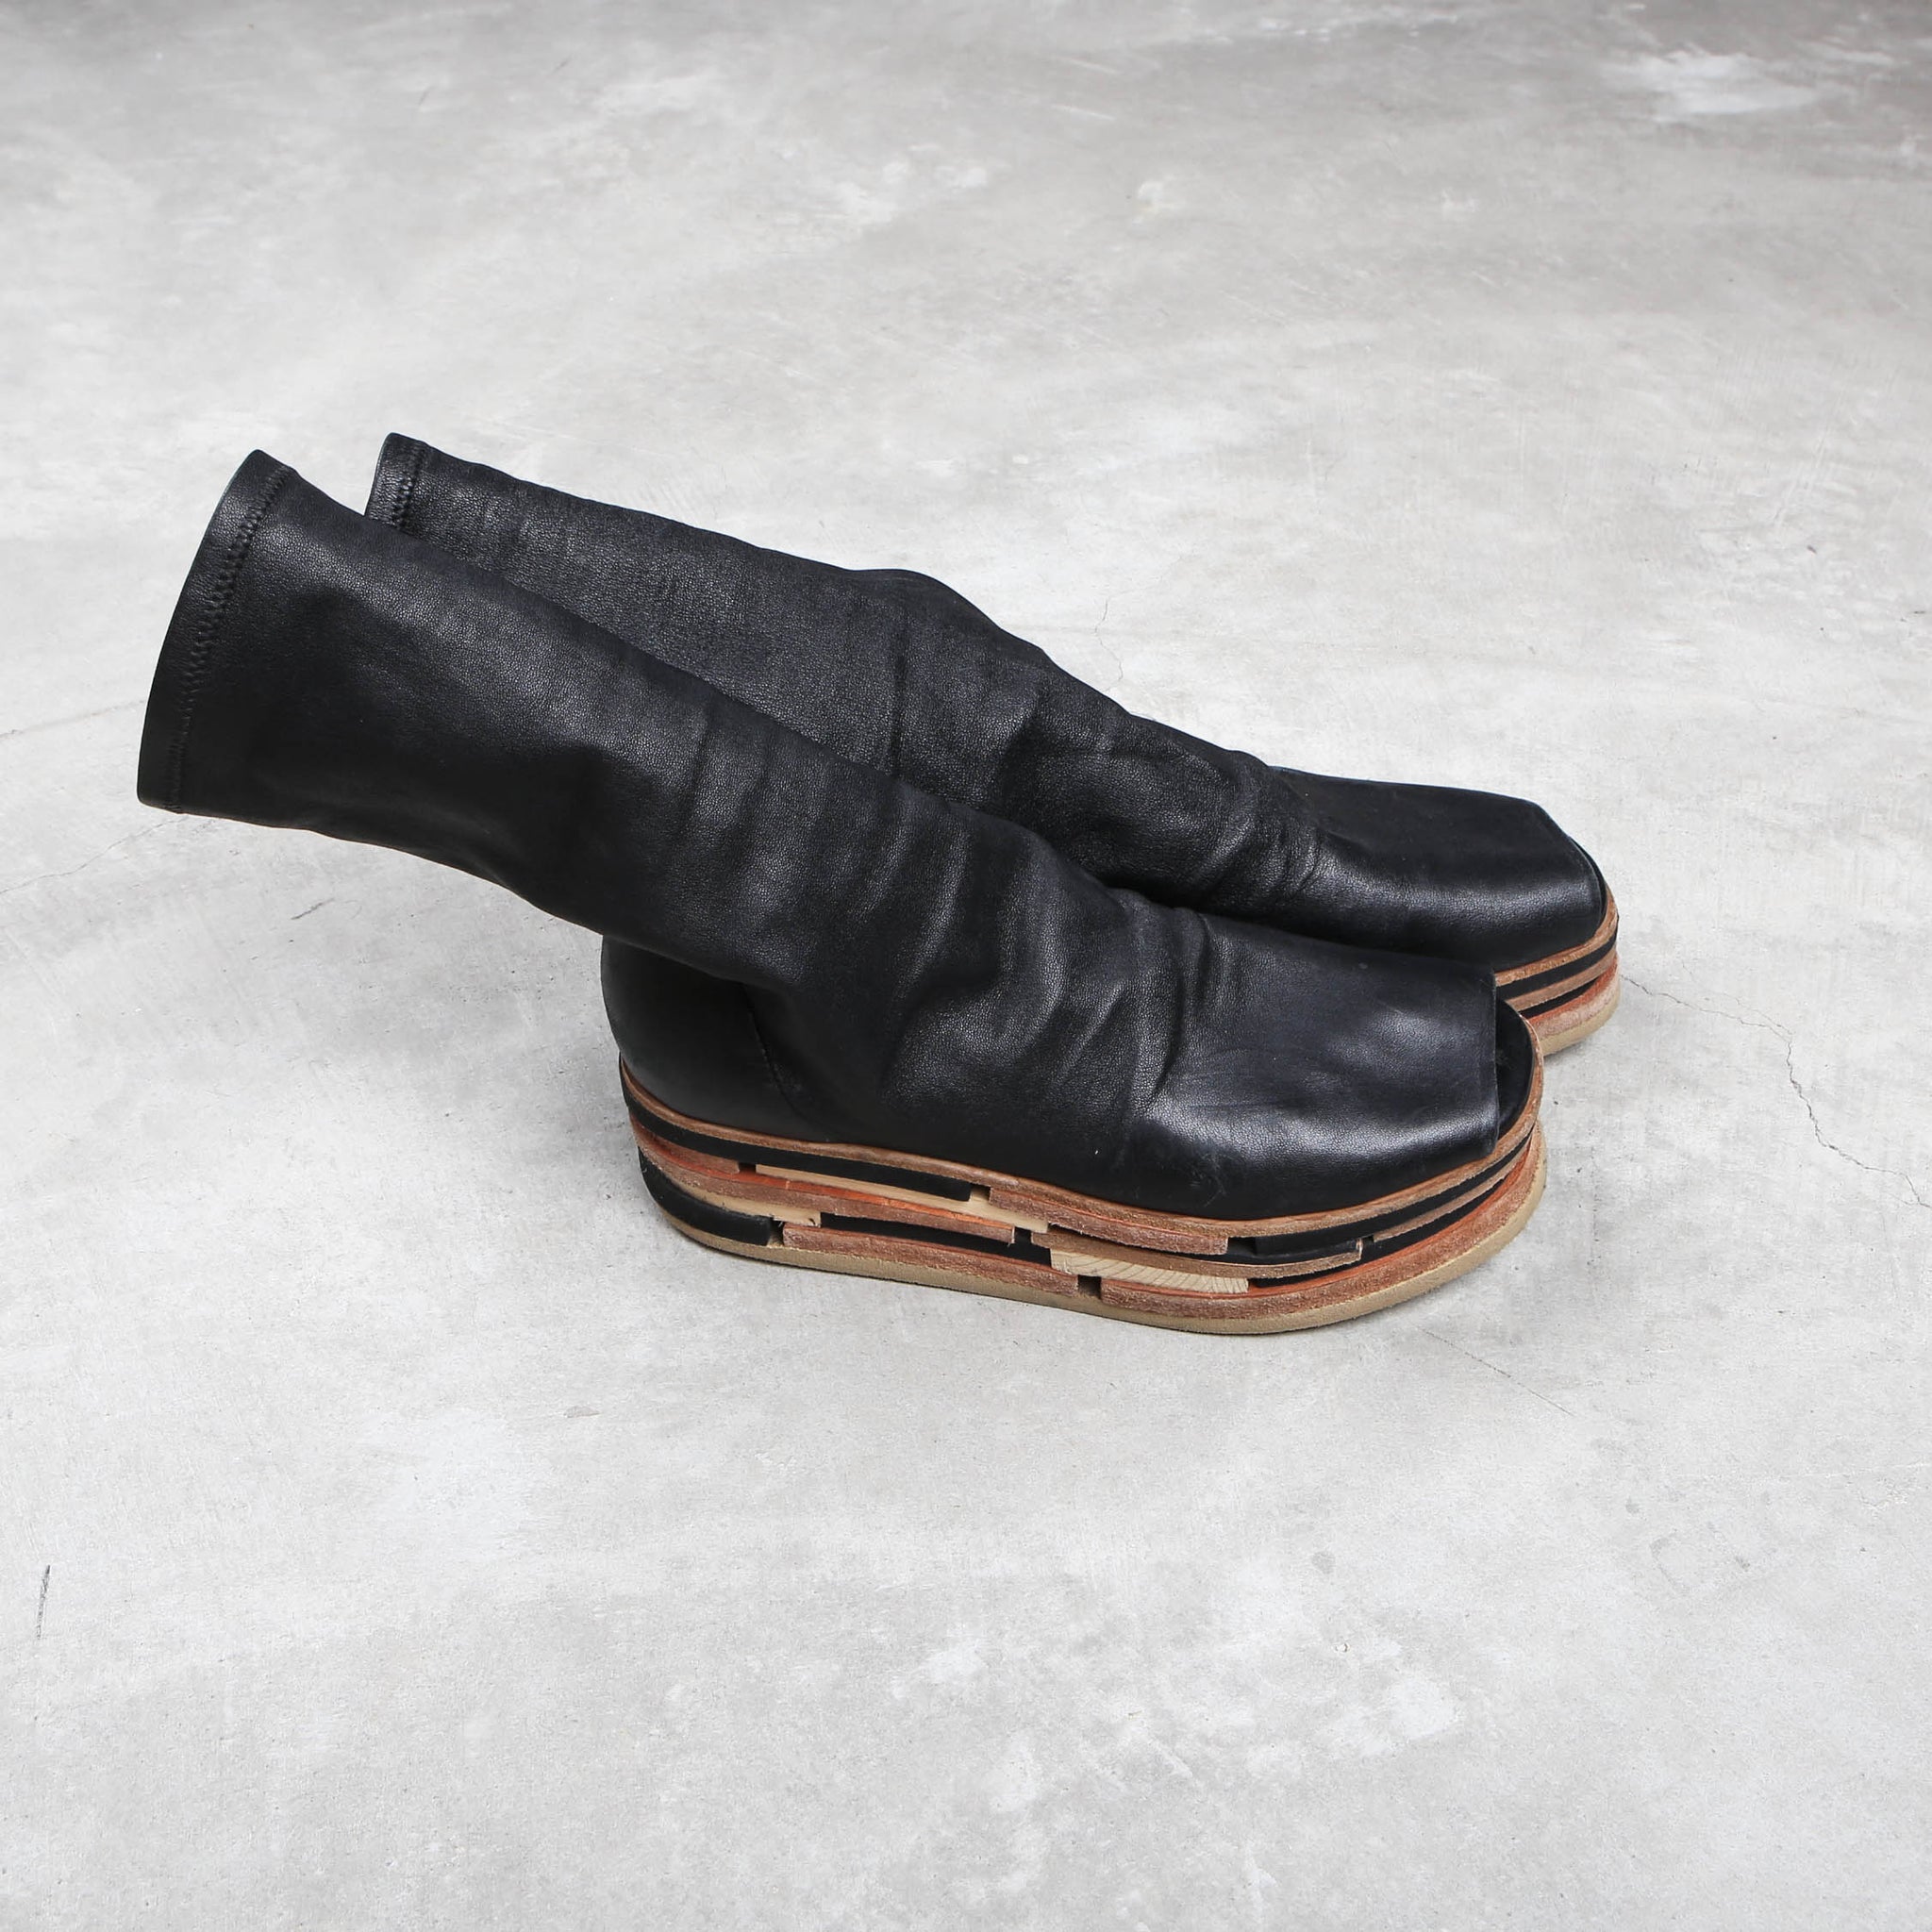 Rick Owens AW/17 Lego Sock Boot